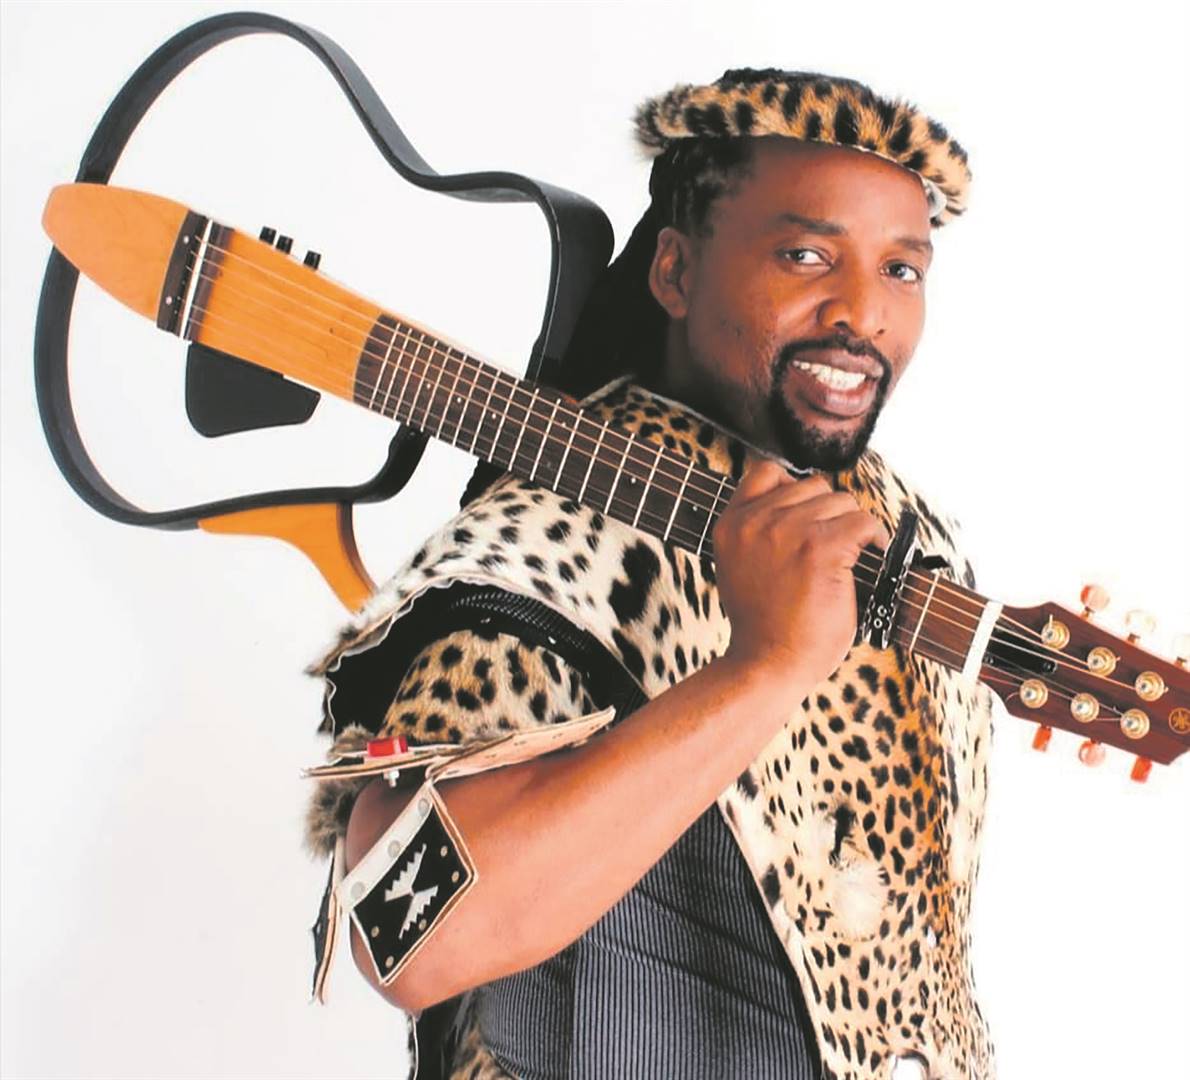 Legendary maskandi musician Ihhashi Elimhlophe said although he may not like the direction the genre has taken these past years, he still loves and values it.